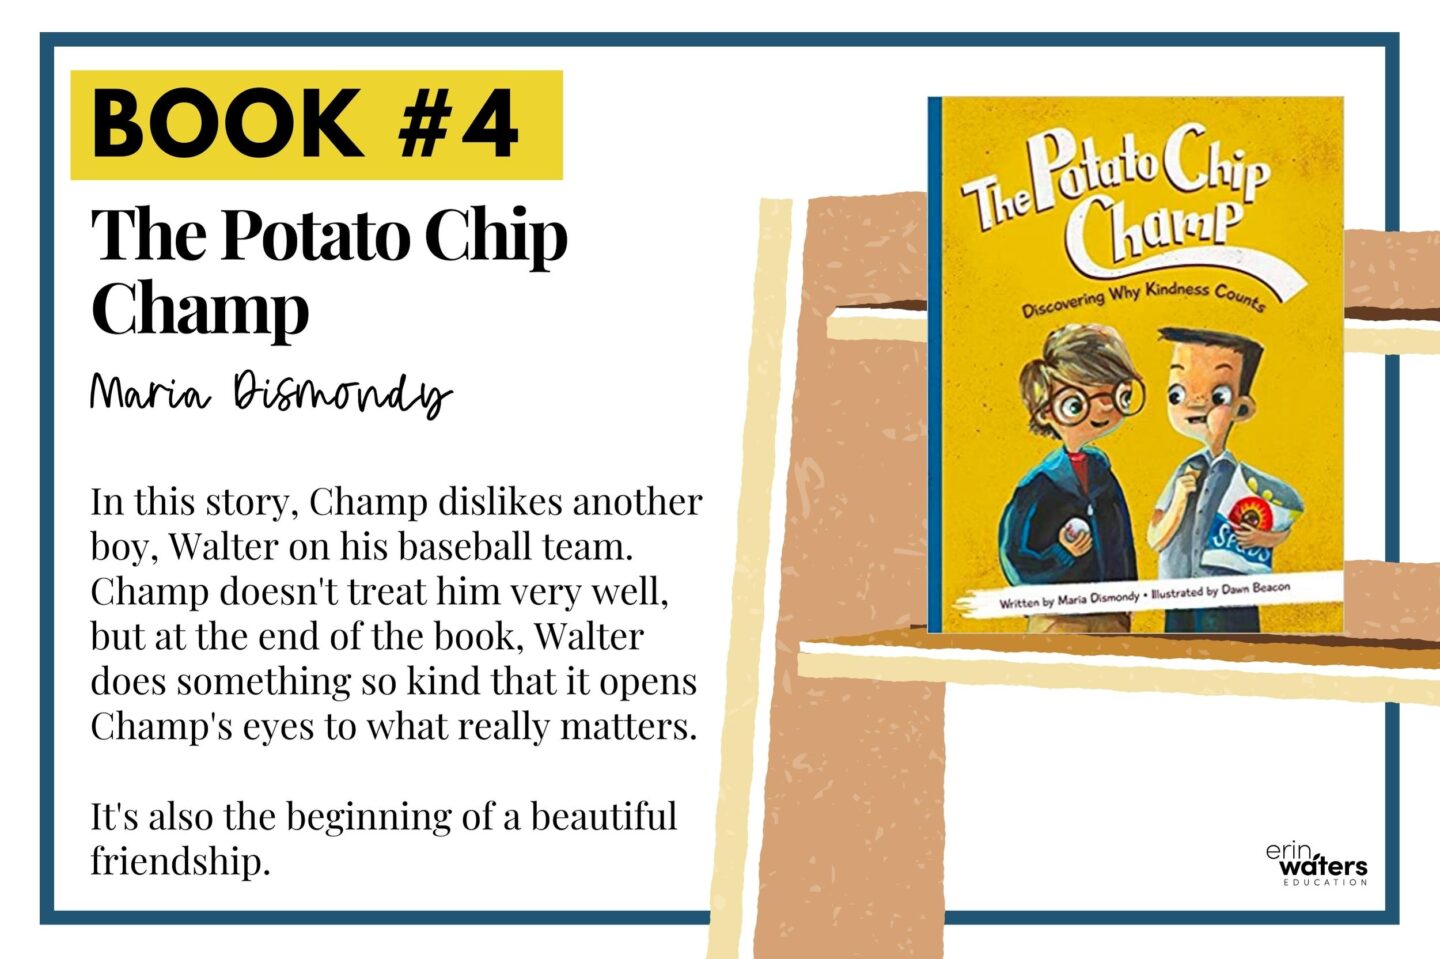 Potato Chip Champ book on a bookshelf to the right while on the left is a summary of the book.